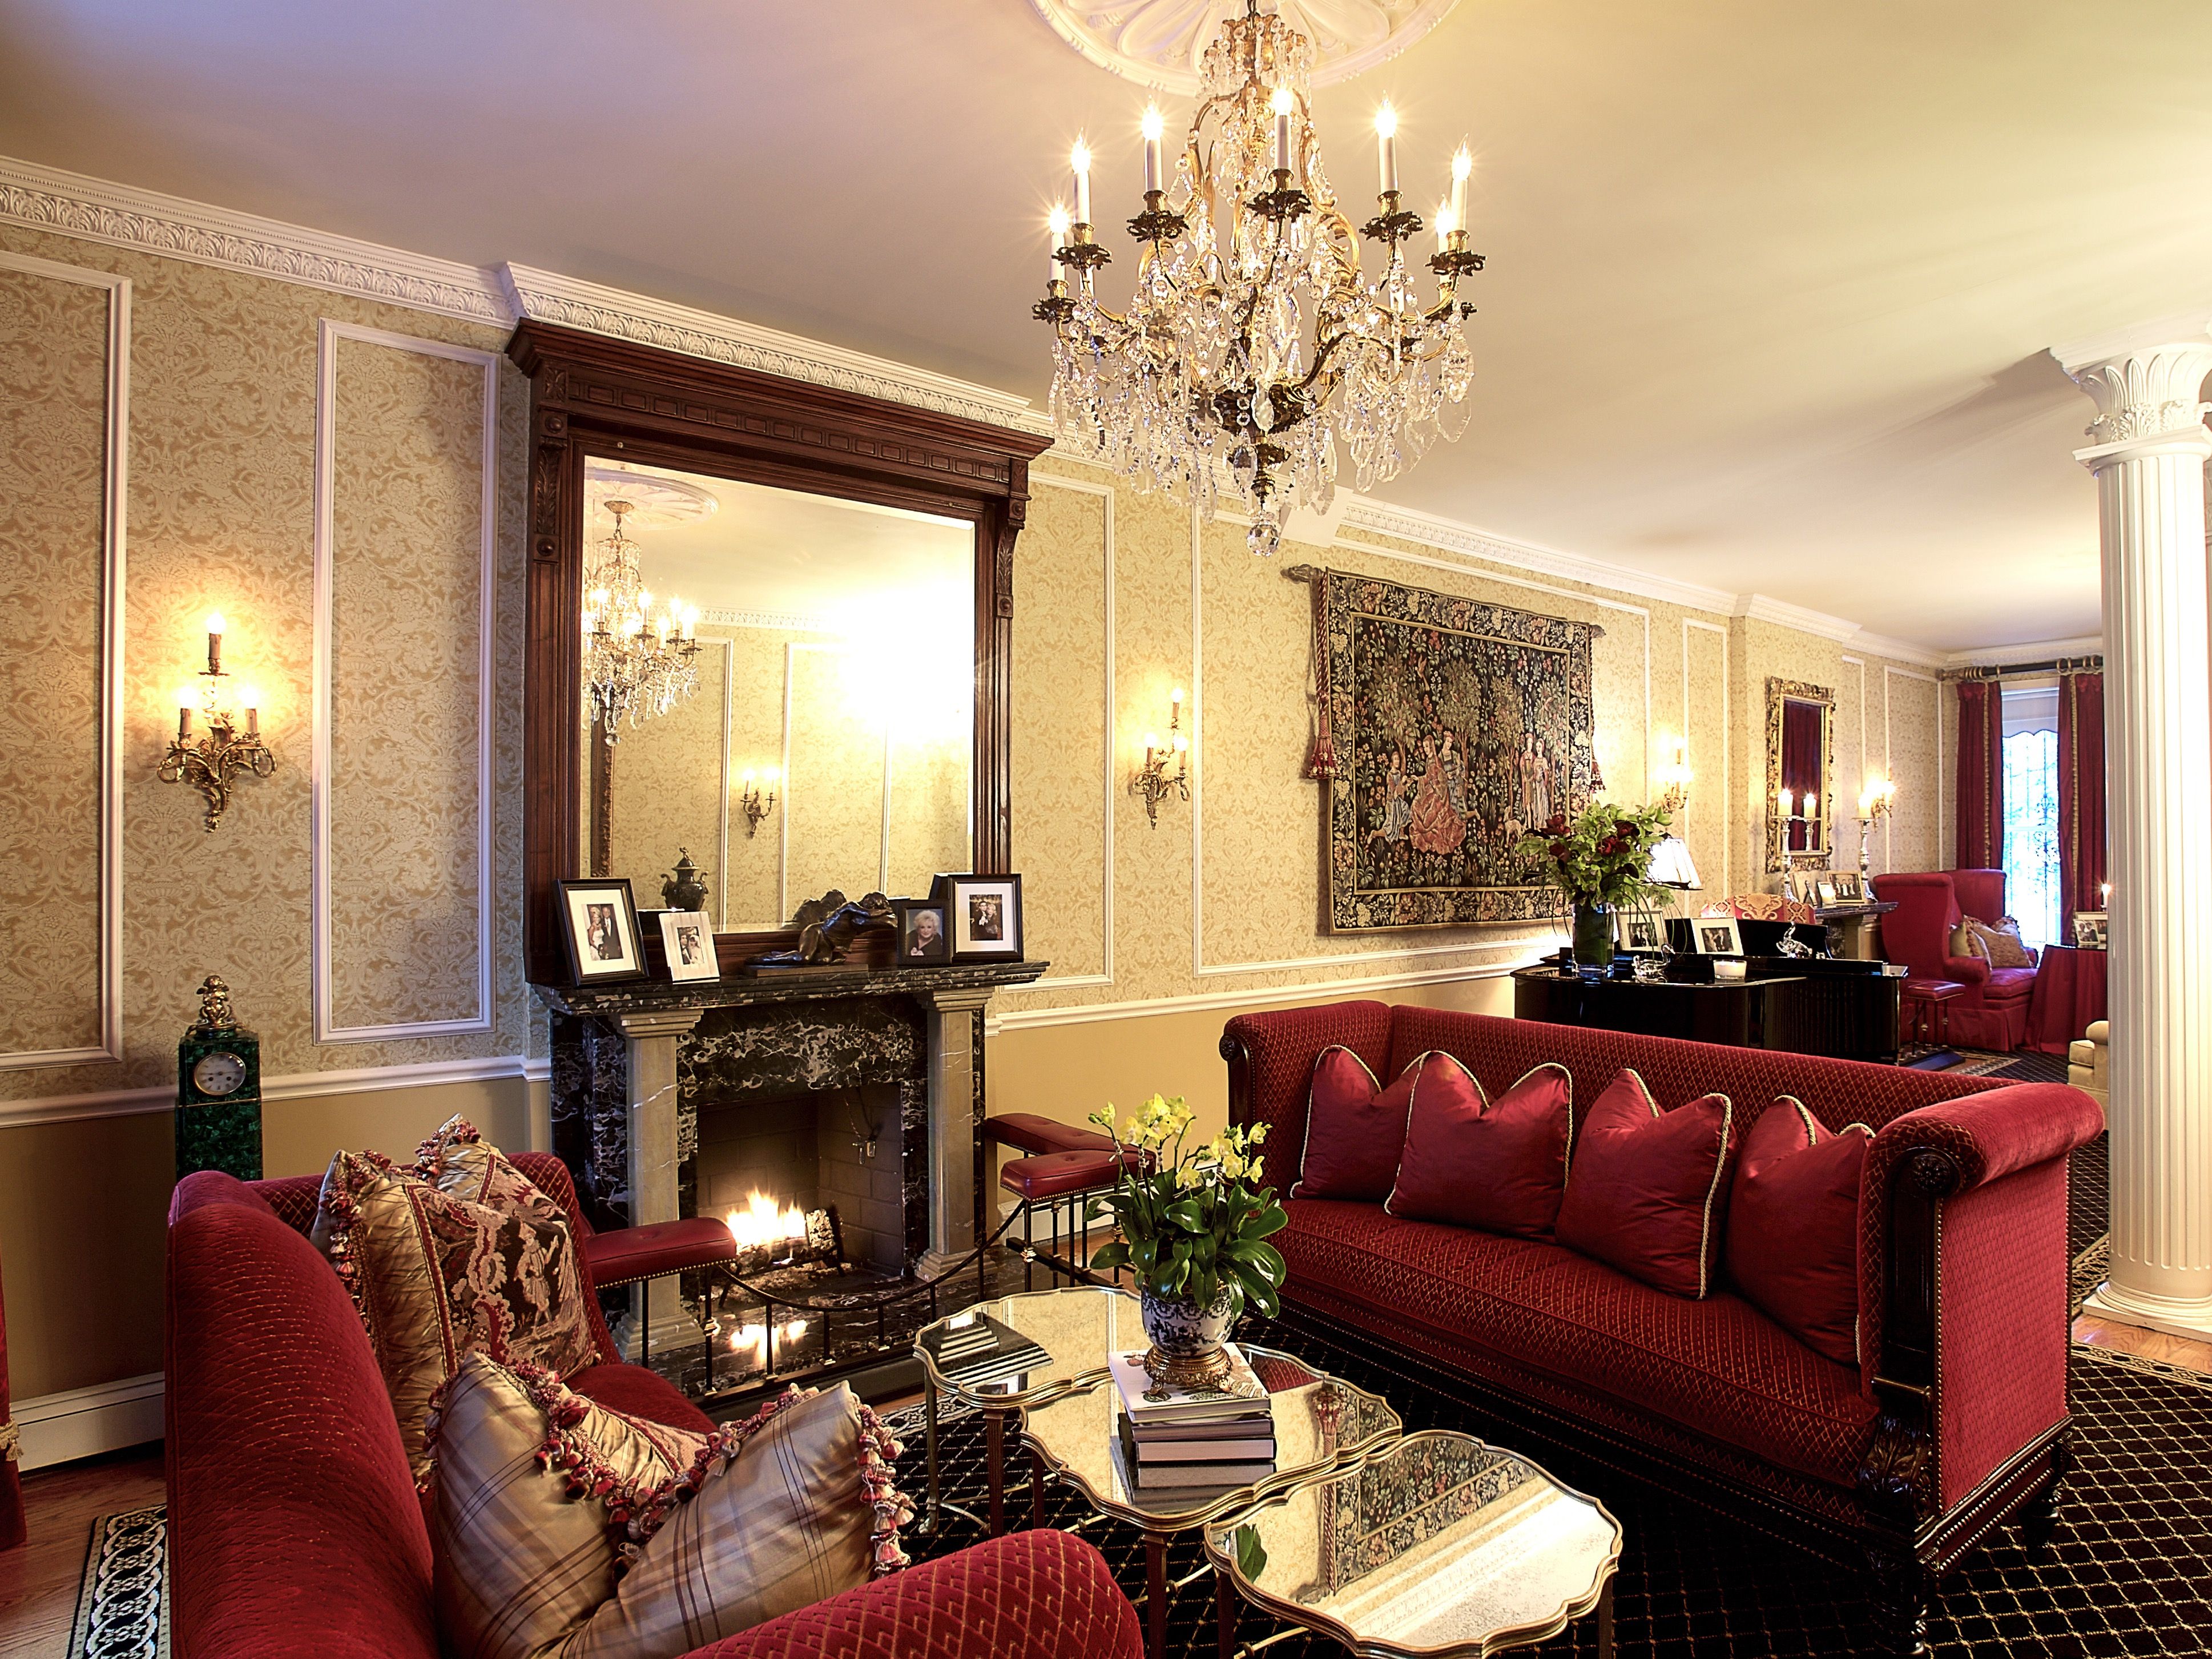 Glamorous And Luxury Victorian Living Room With Red Sofas And Sparkling Chandelier (View 18 of 32)